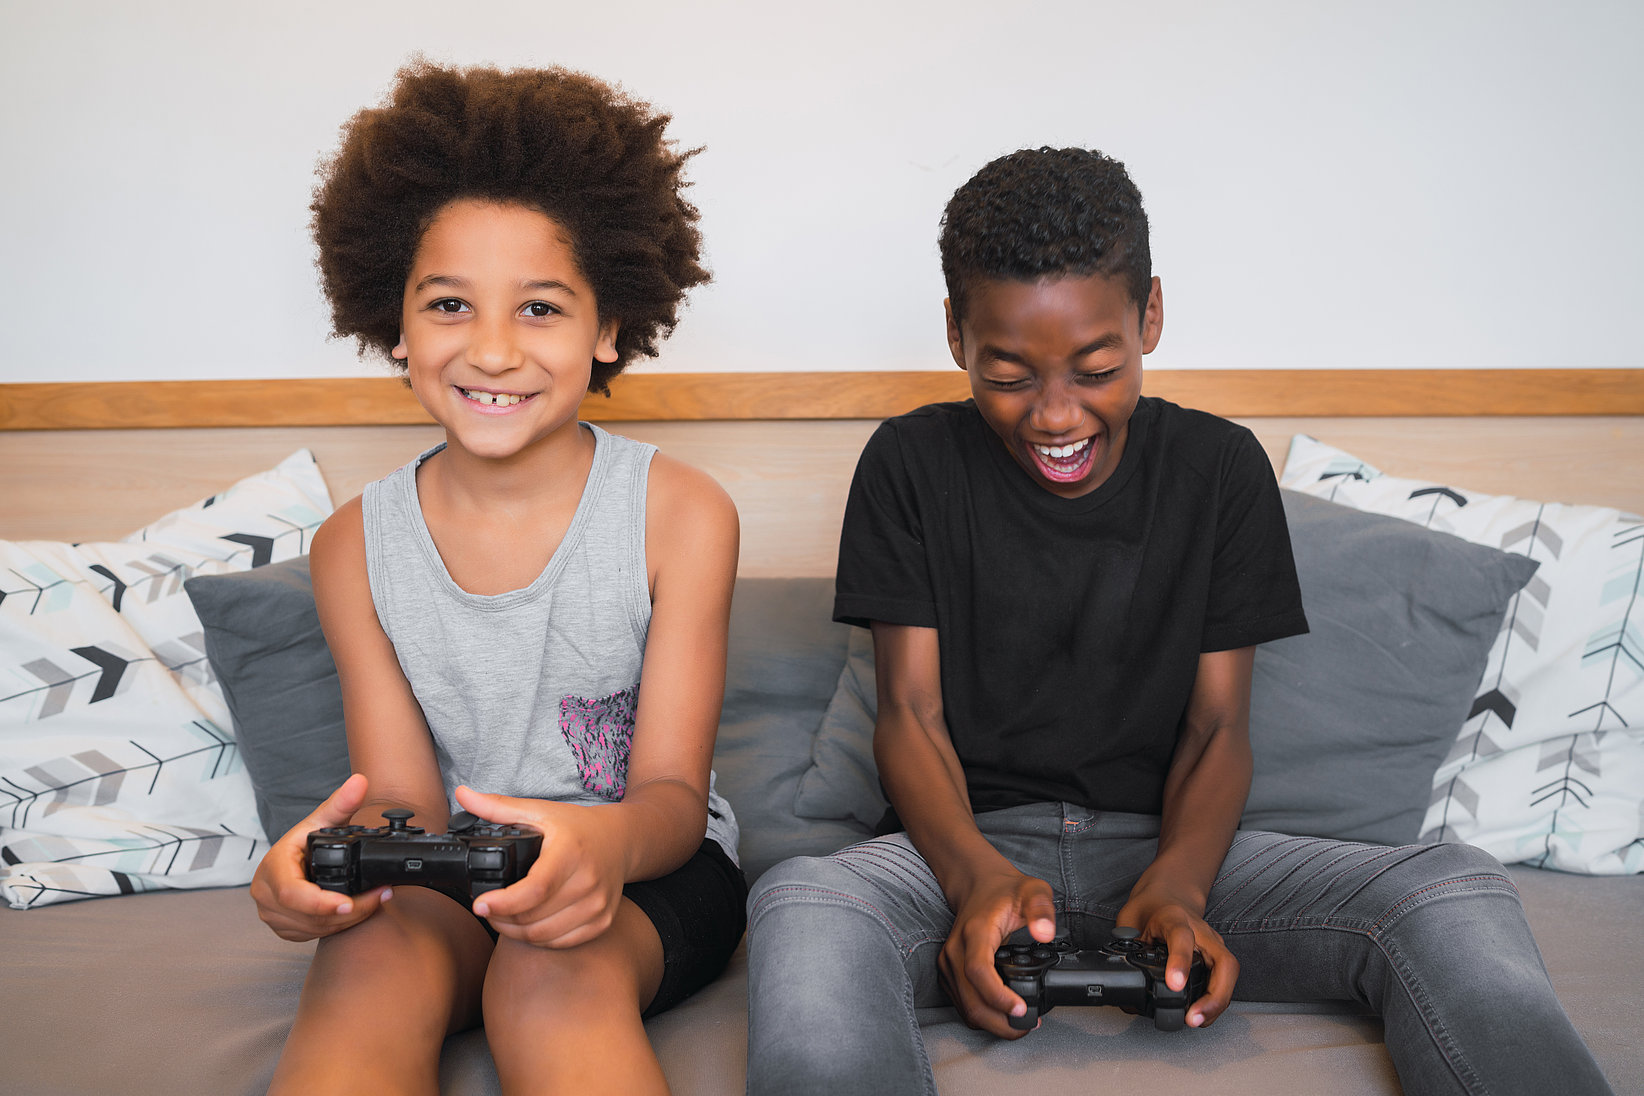 Two boys sit smiling on a sofa while they play a game.